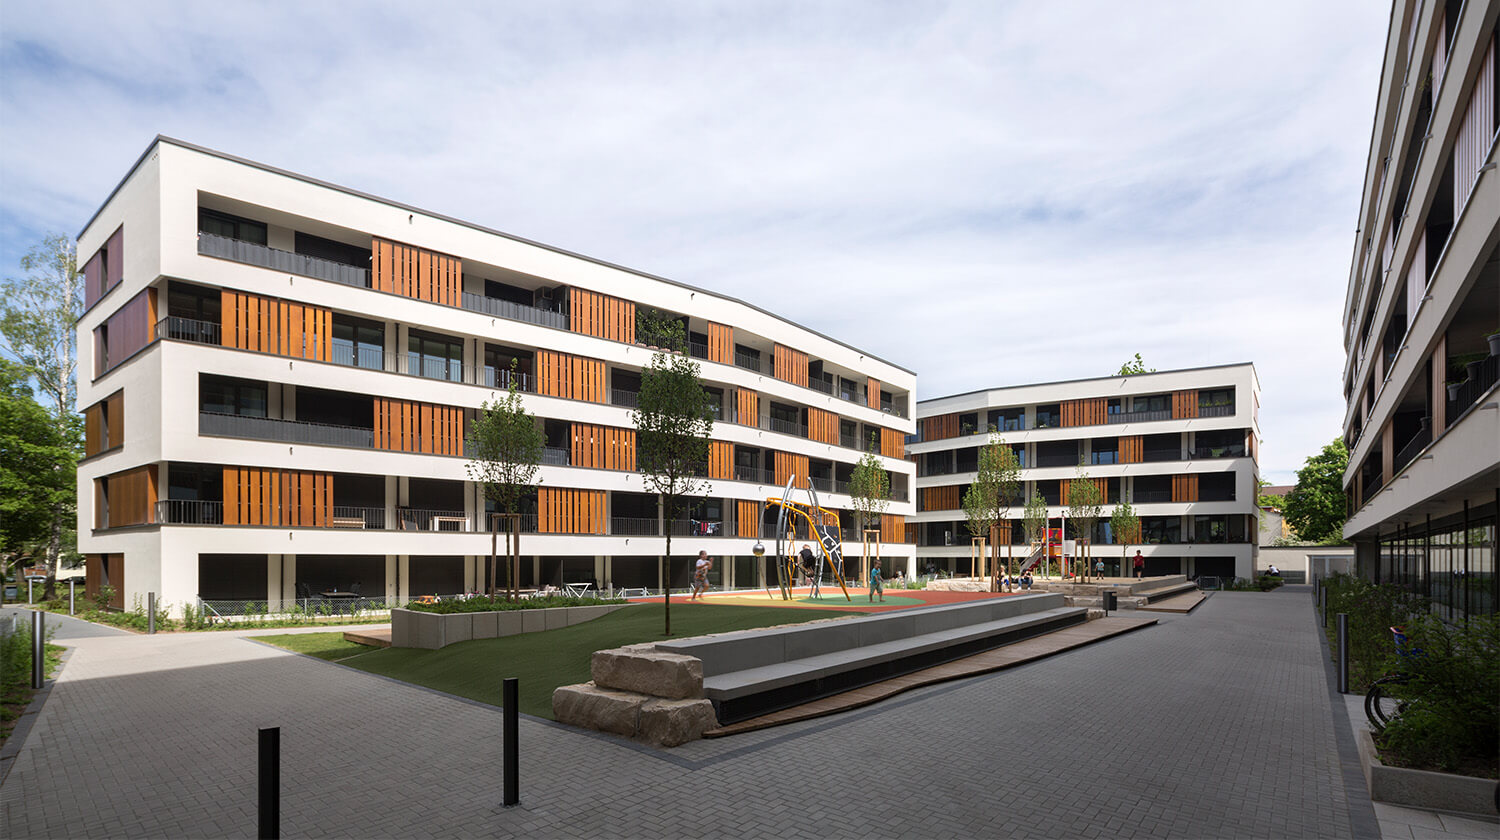 The "Neues Wohnen Sündersbühl " quarter in Nuremberg shows how future-oriented living works - realized with a Capatect external thermal insulation composite system and clad with striking wood elements. Thermosan facade plaster and facade paint from Caparol provide the facade with long-lasting protection against algae and fungal attack.